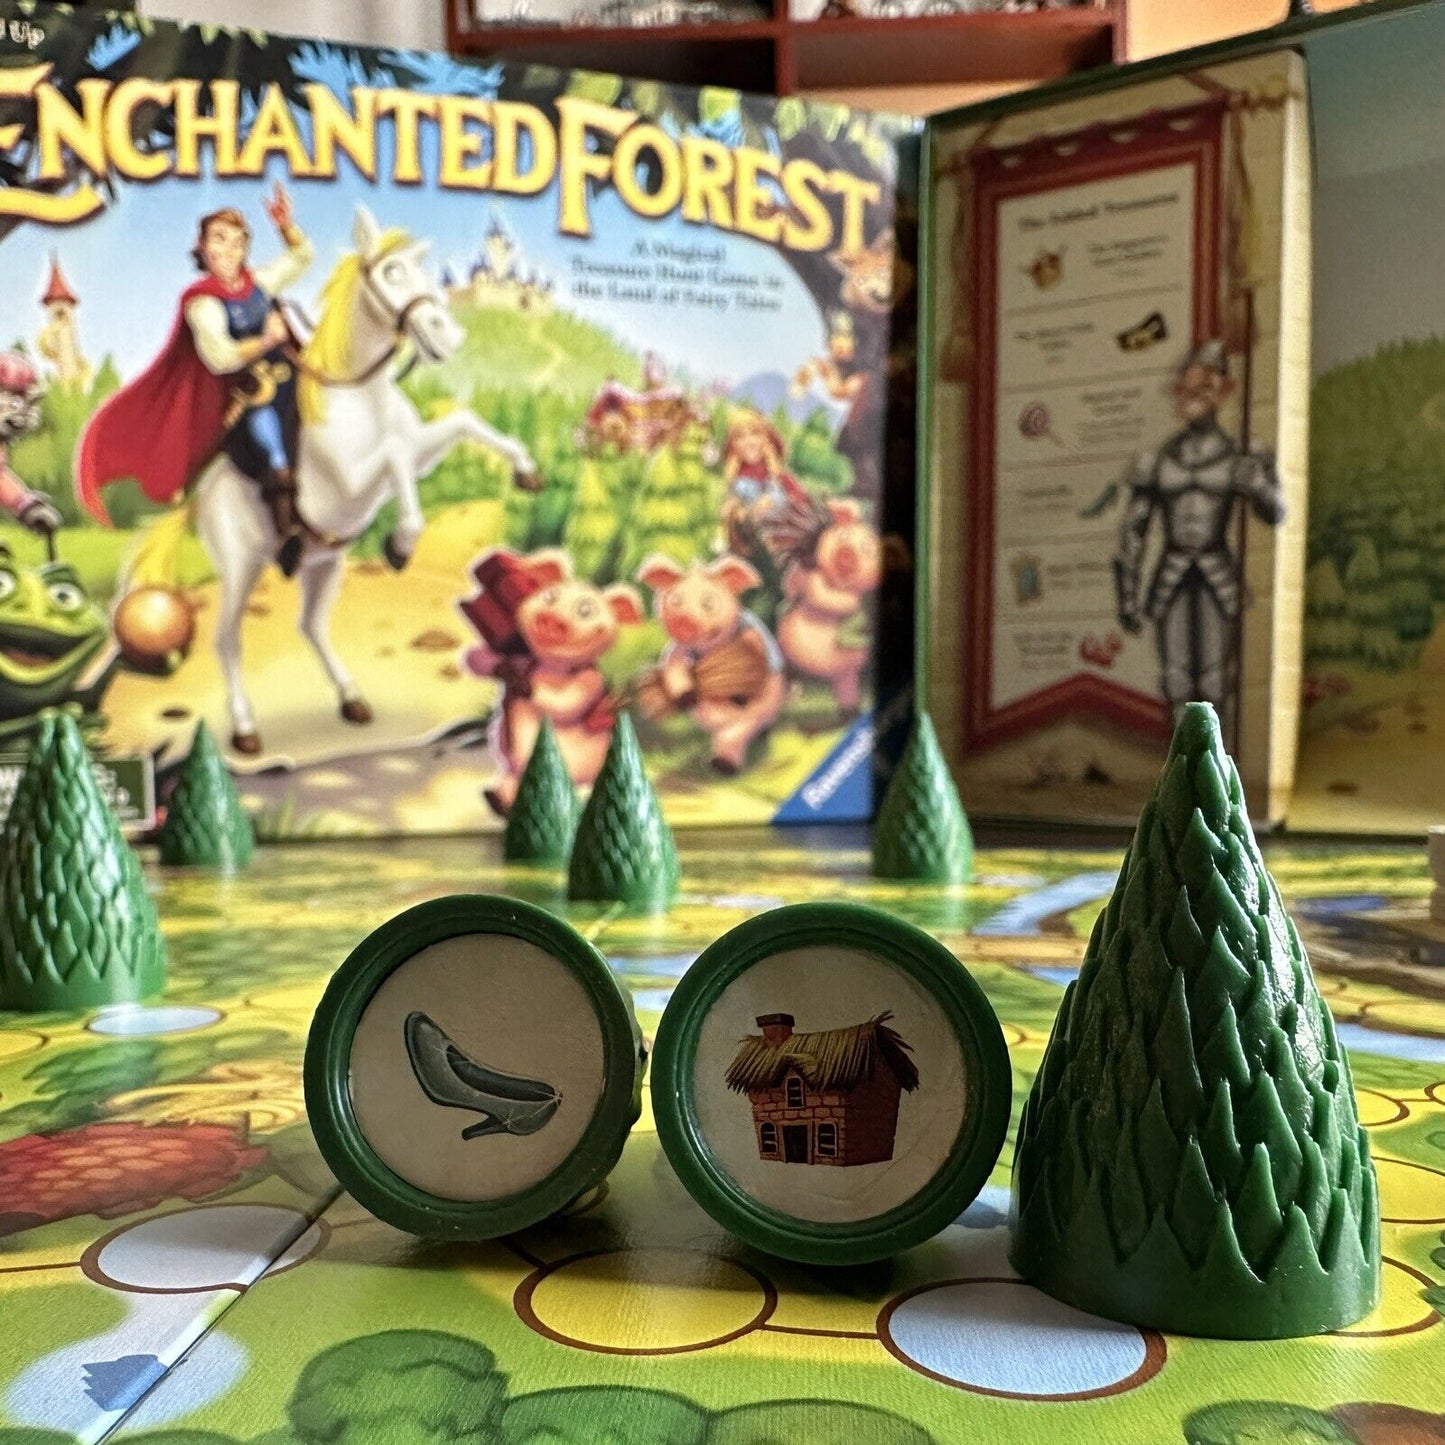 Ravensburger Enchanted Forest Board Game Fairy Tales Treasure Hunt Family Fun